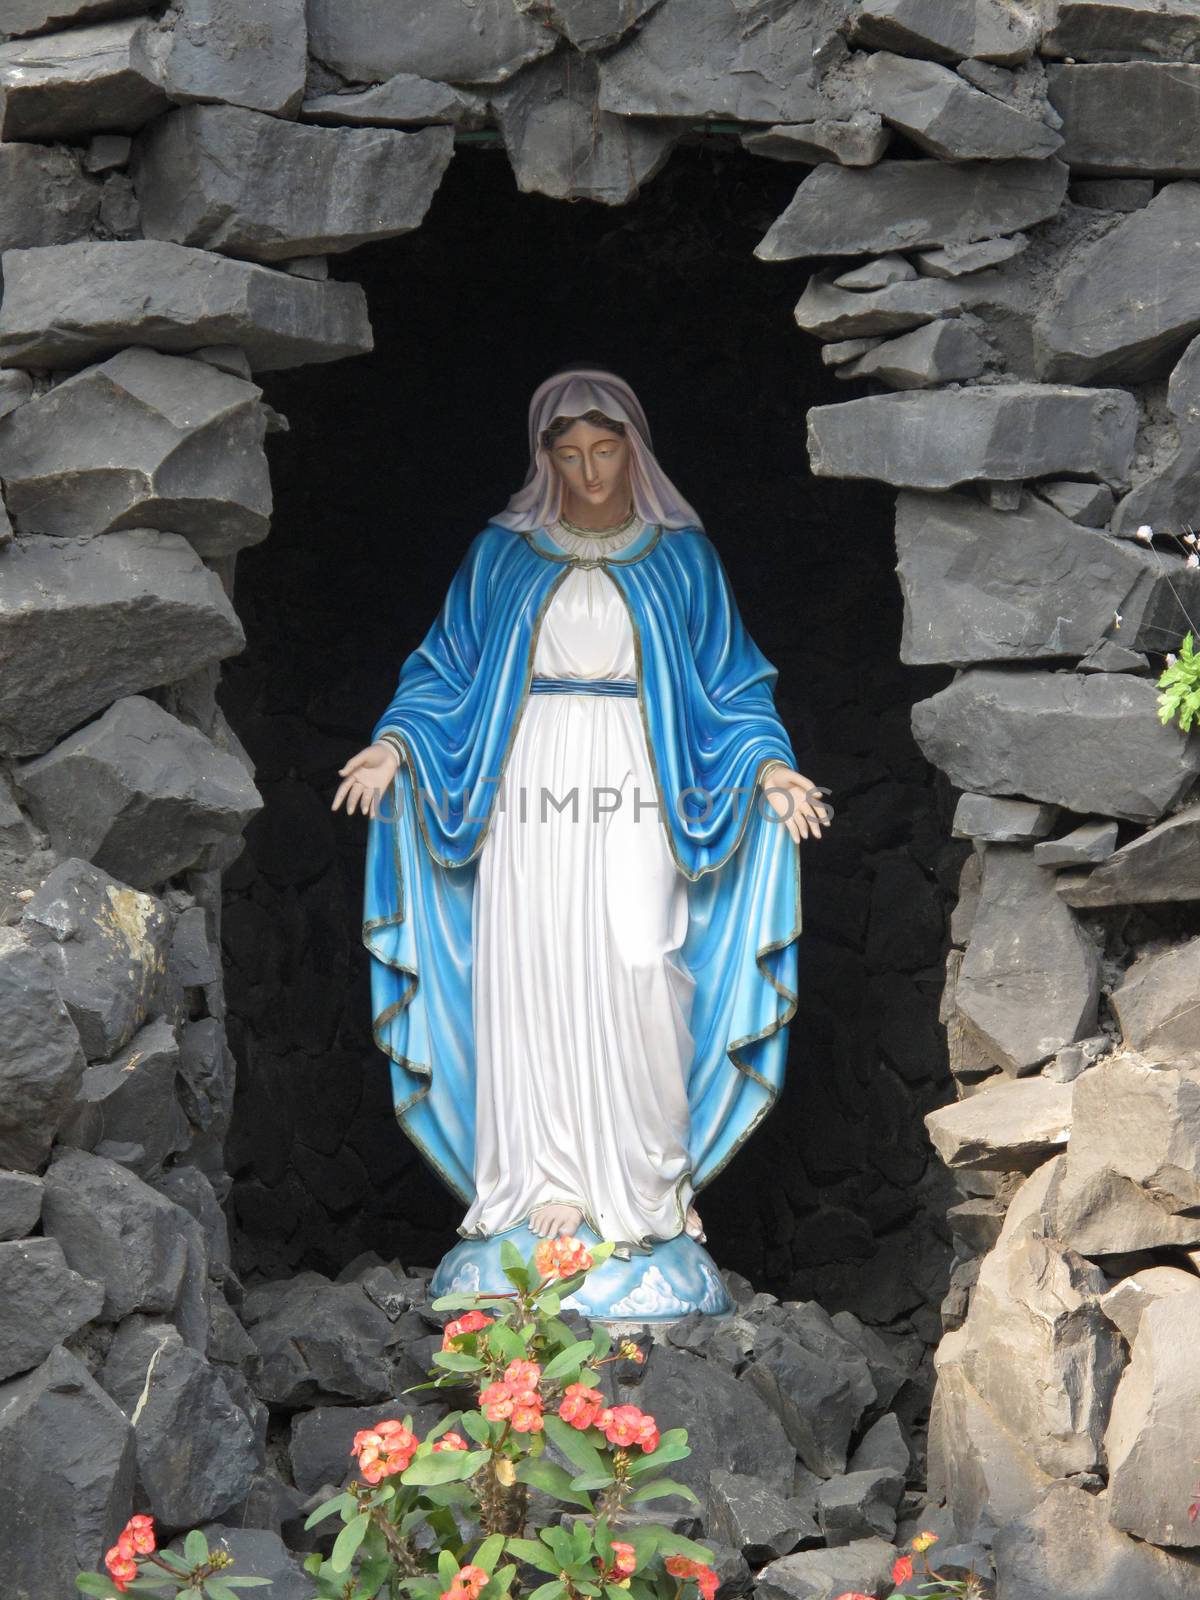 Our Lady of Lourdes by atlas